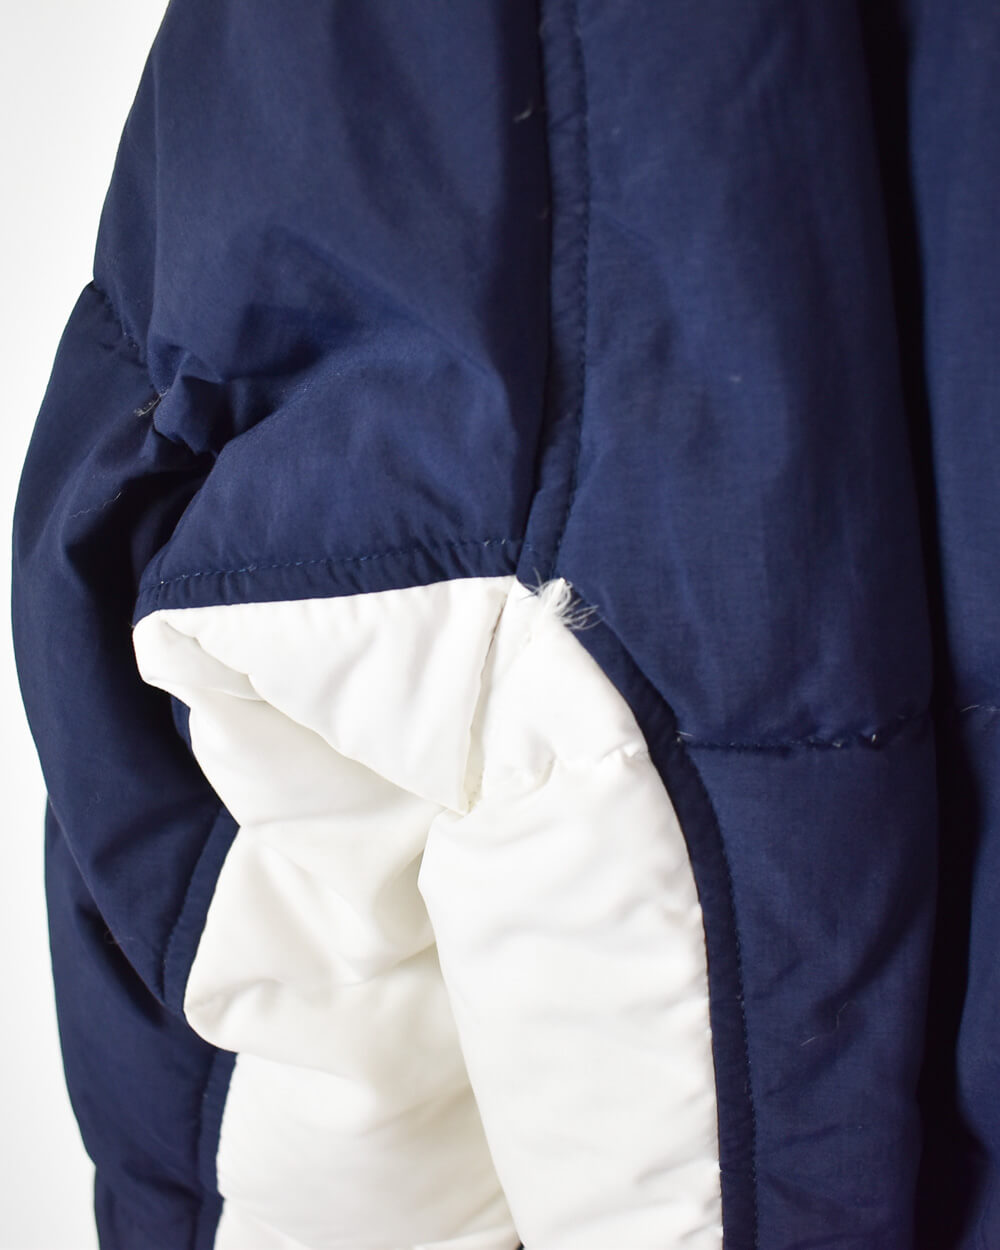 Navy Nike Down Puffer Jacket - Small